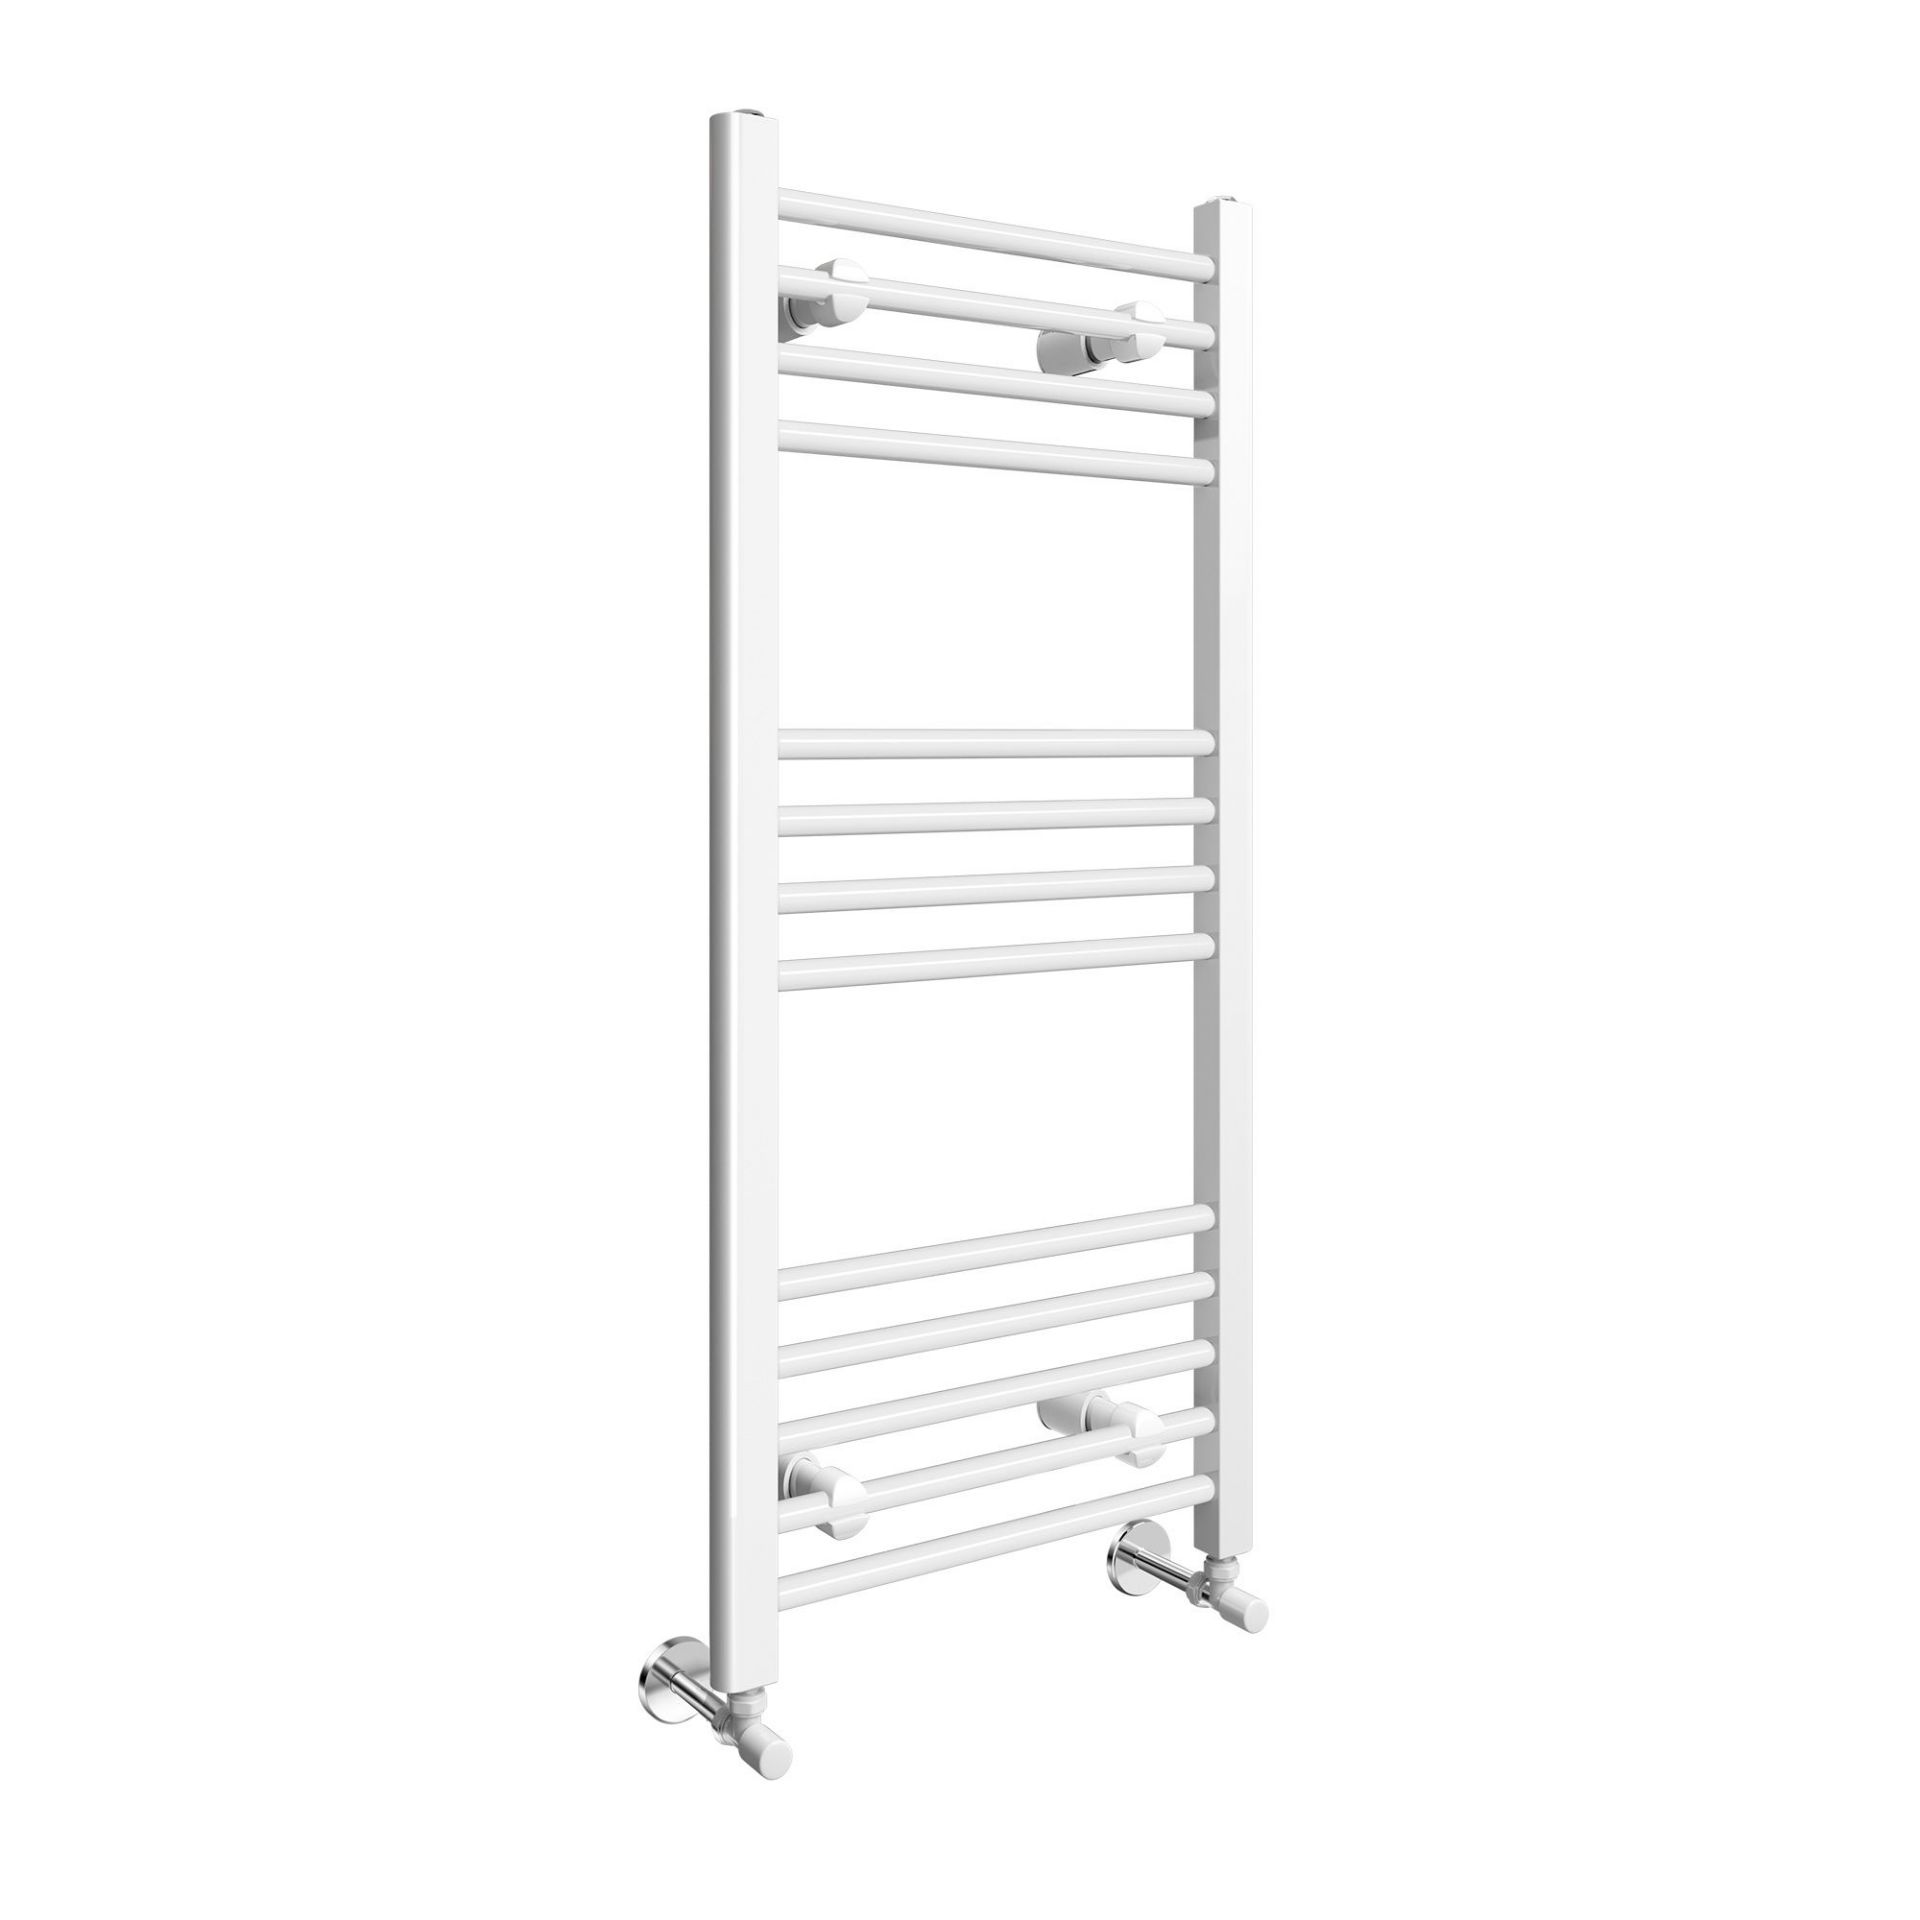 (PT166) 1000x450mm White Straight Rail Ladder Towel Radiator. Made from low carbon steel Finished - Image 3 of 4